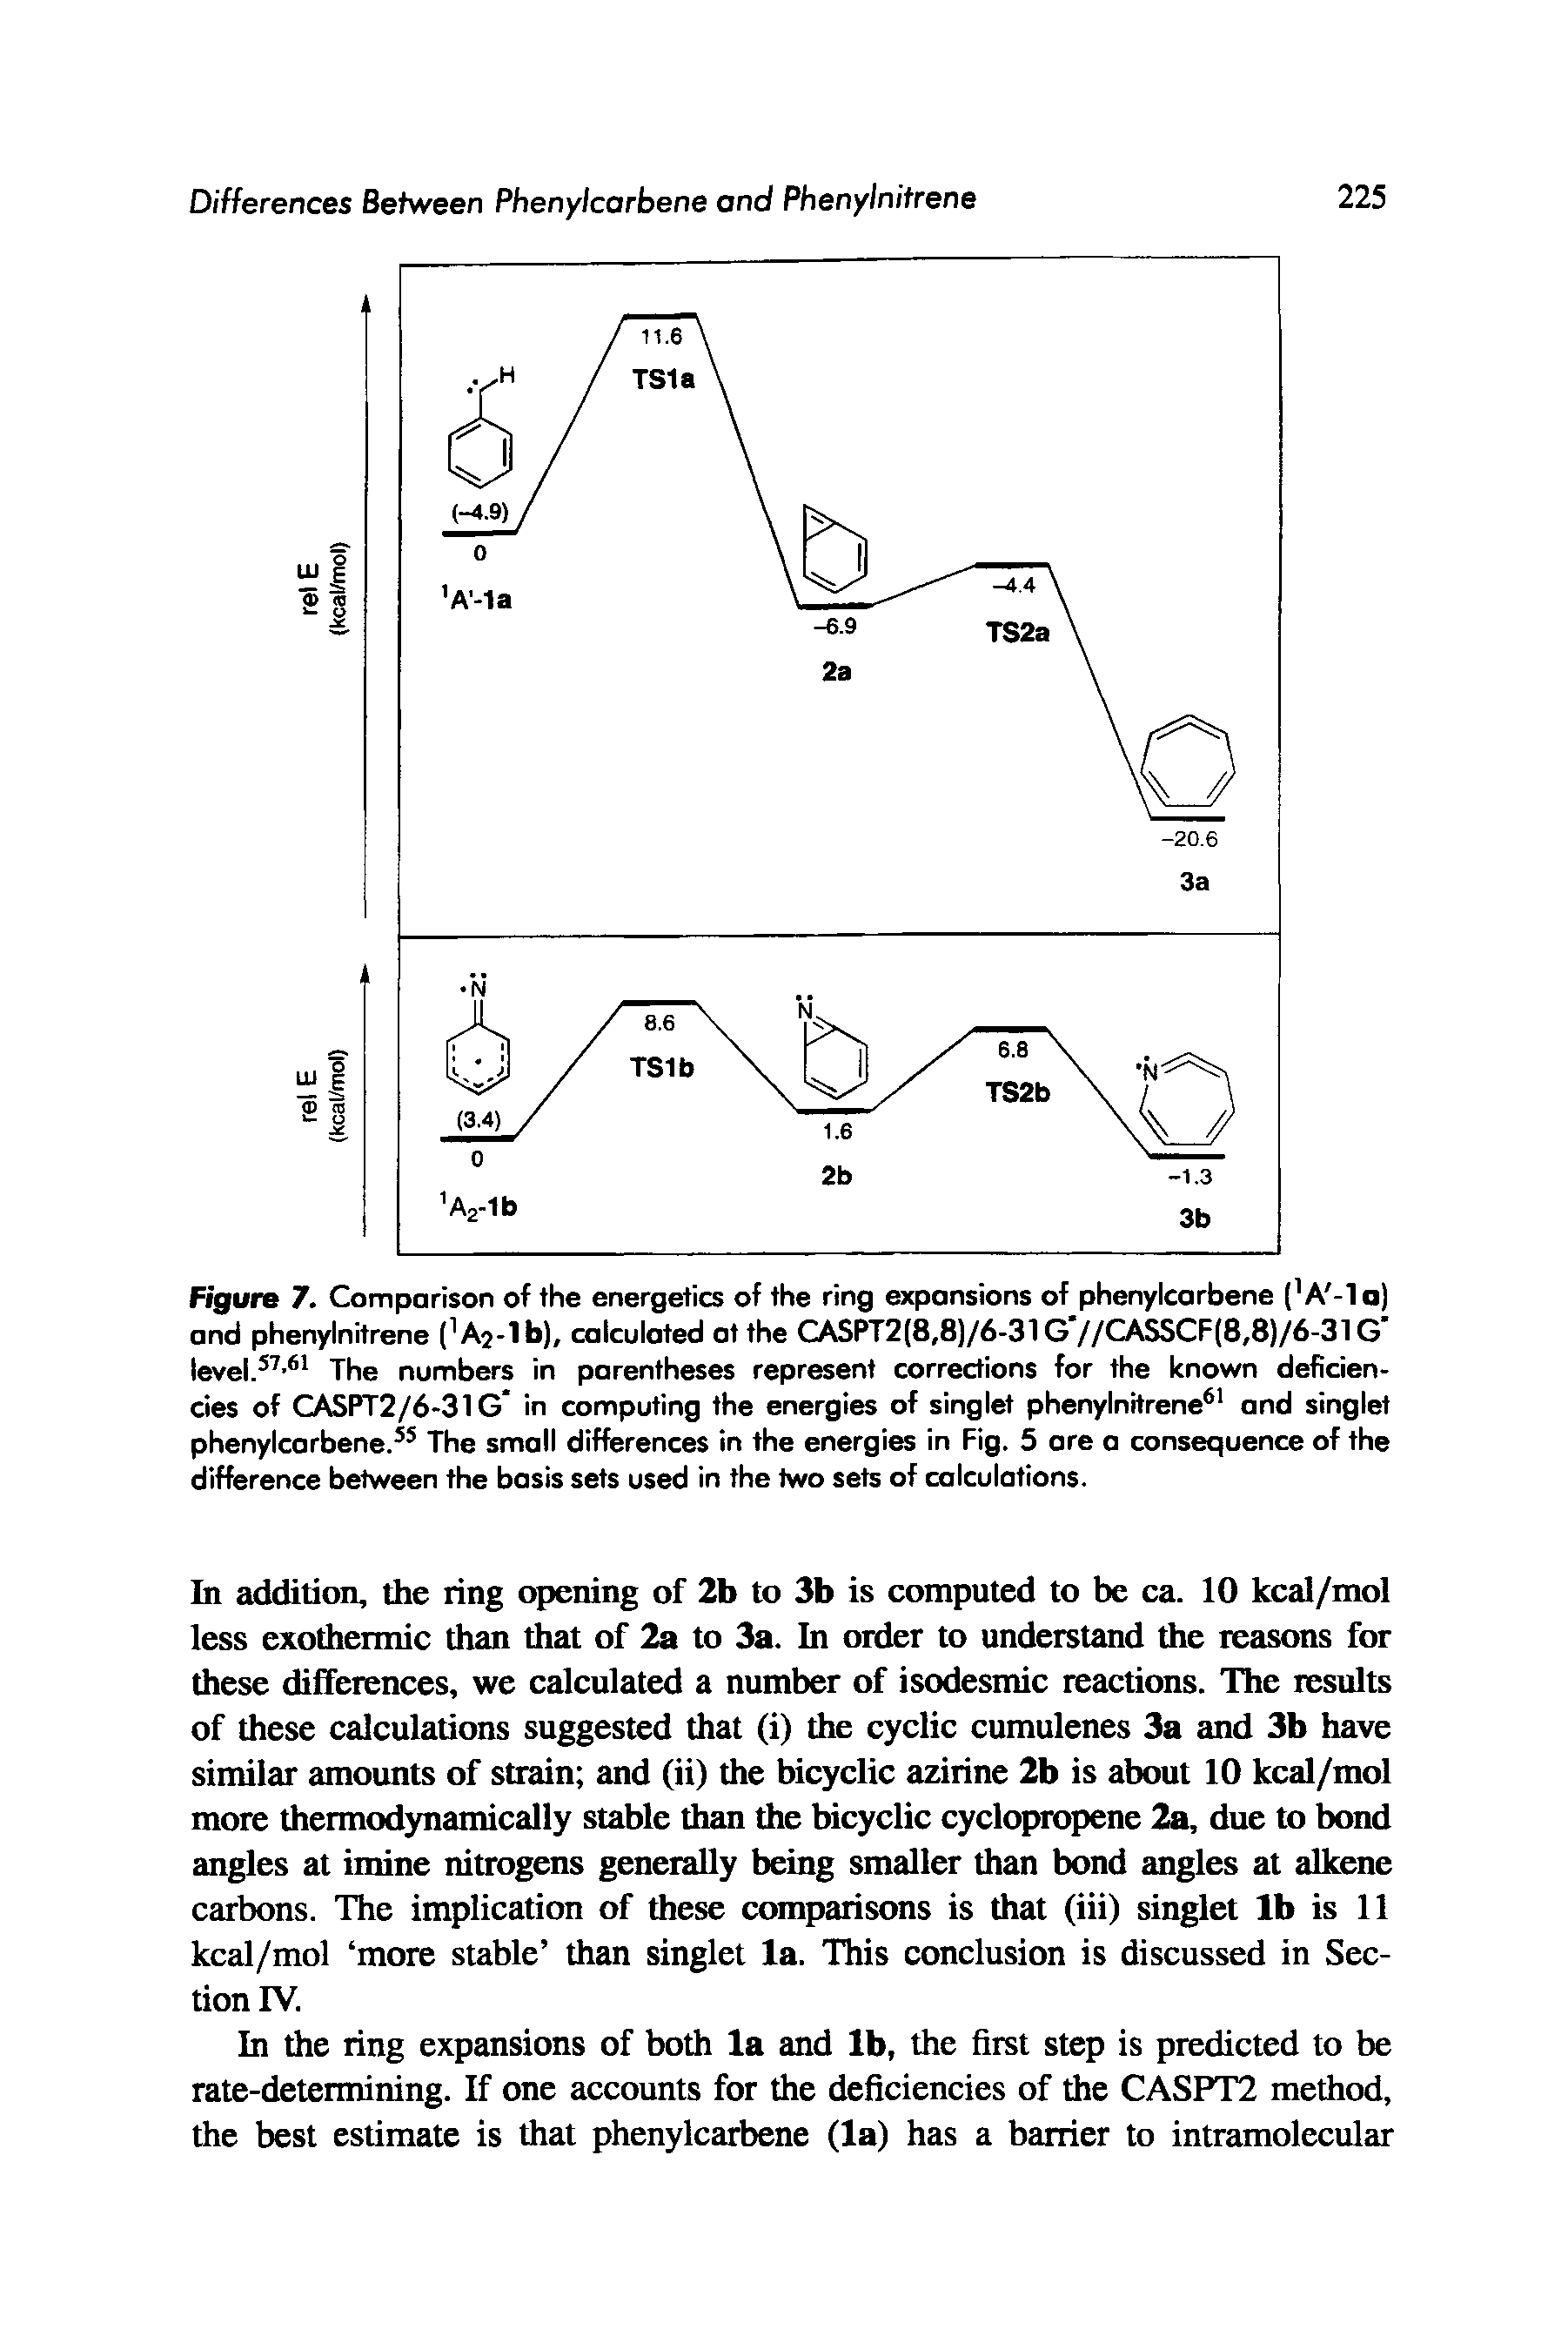 Figure 7. Comparison of the energetics of the ring expansions of phenylcarbene ( A -la) and phenylnitrene (1A2-lb), calculated at the CASPT2(8,8)/6-31 G //CASSCF(8,8)/6-31 G level.57-61 The numbers in parentheses represent corrections for the known deficiencies of CASPT2/6-31G in computing the energies of singlet phenylnitrene61 and singlet phenylcarbene.55 The small differences in the energies in Fig. 5 are a consequence of the difference between the basis sets used in the two sets of calculations.